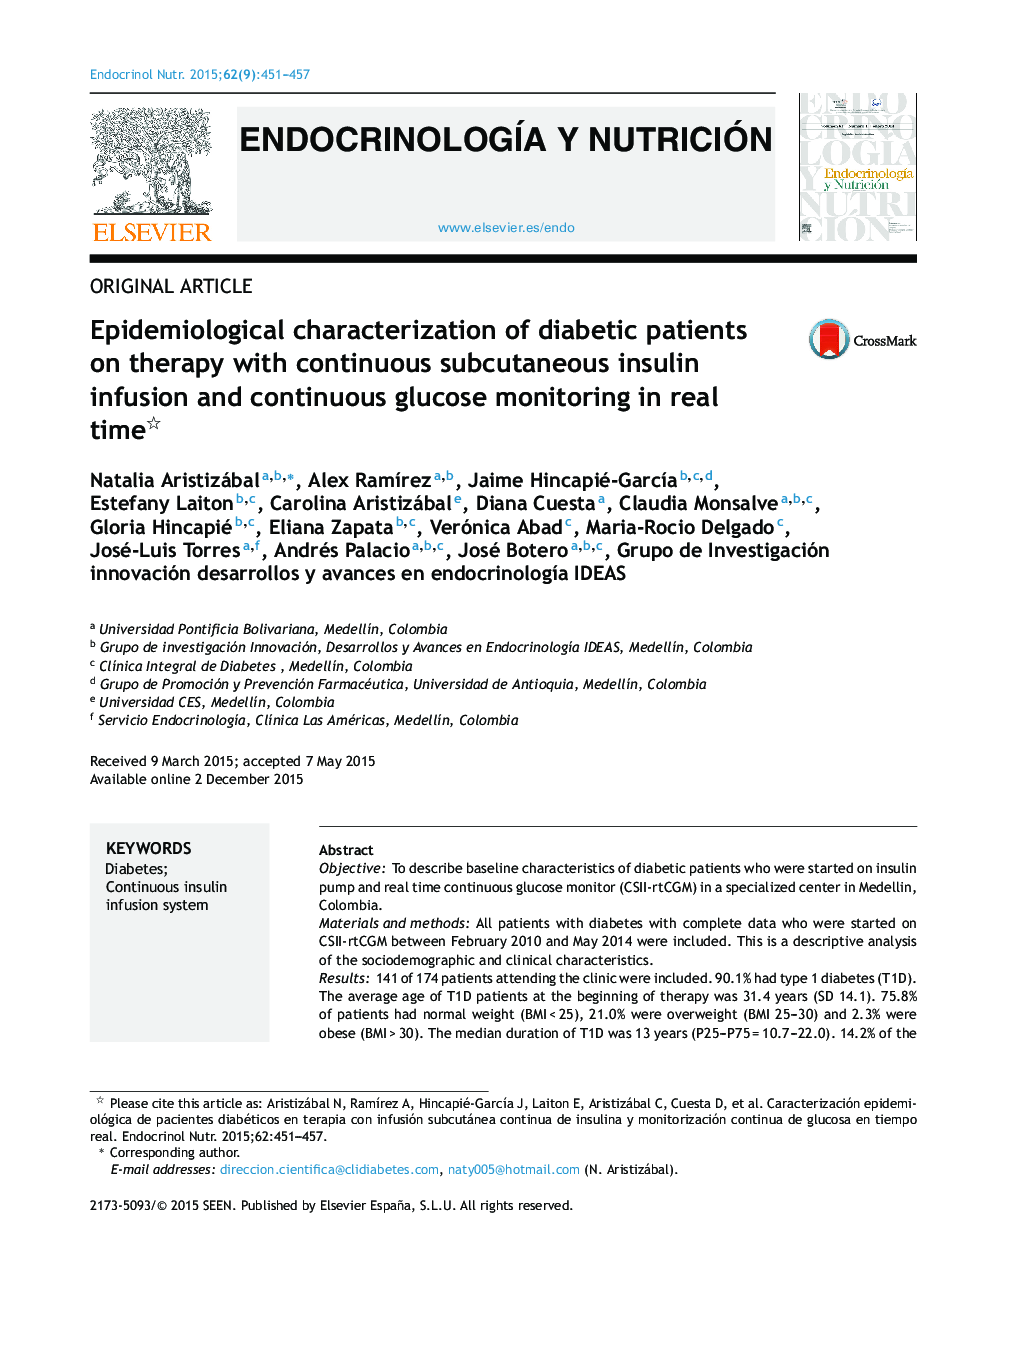 Epidemiological characterization of diabetic patients on therapy with continuous subcutaneous insulin infusion and continuous glucose monitoring in real time 